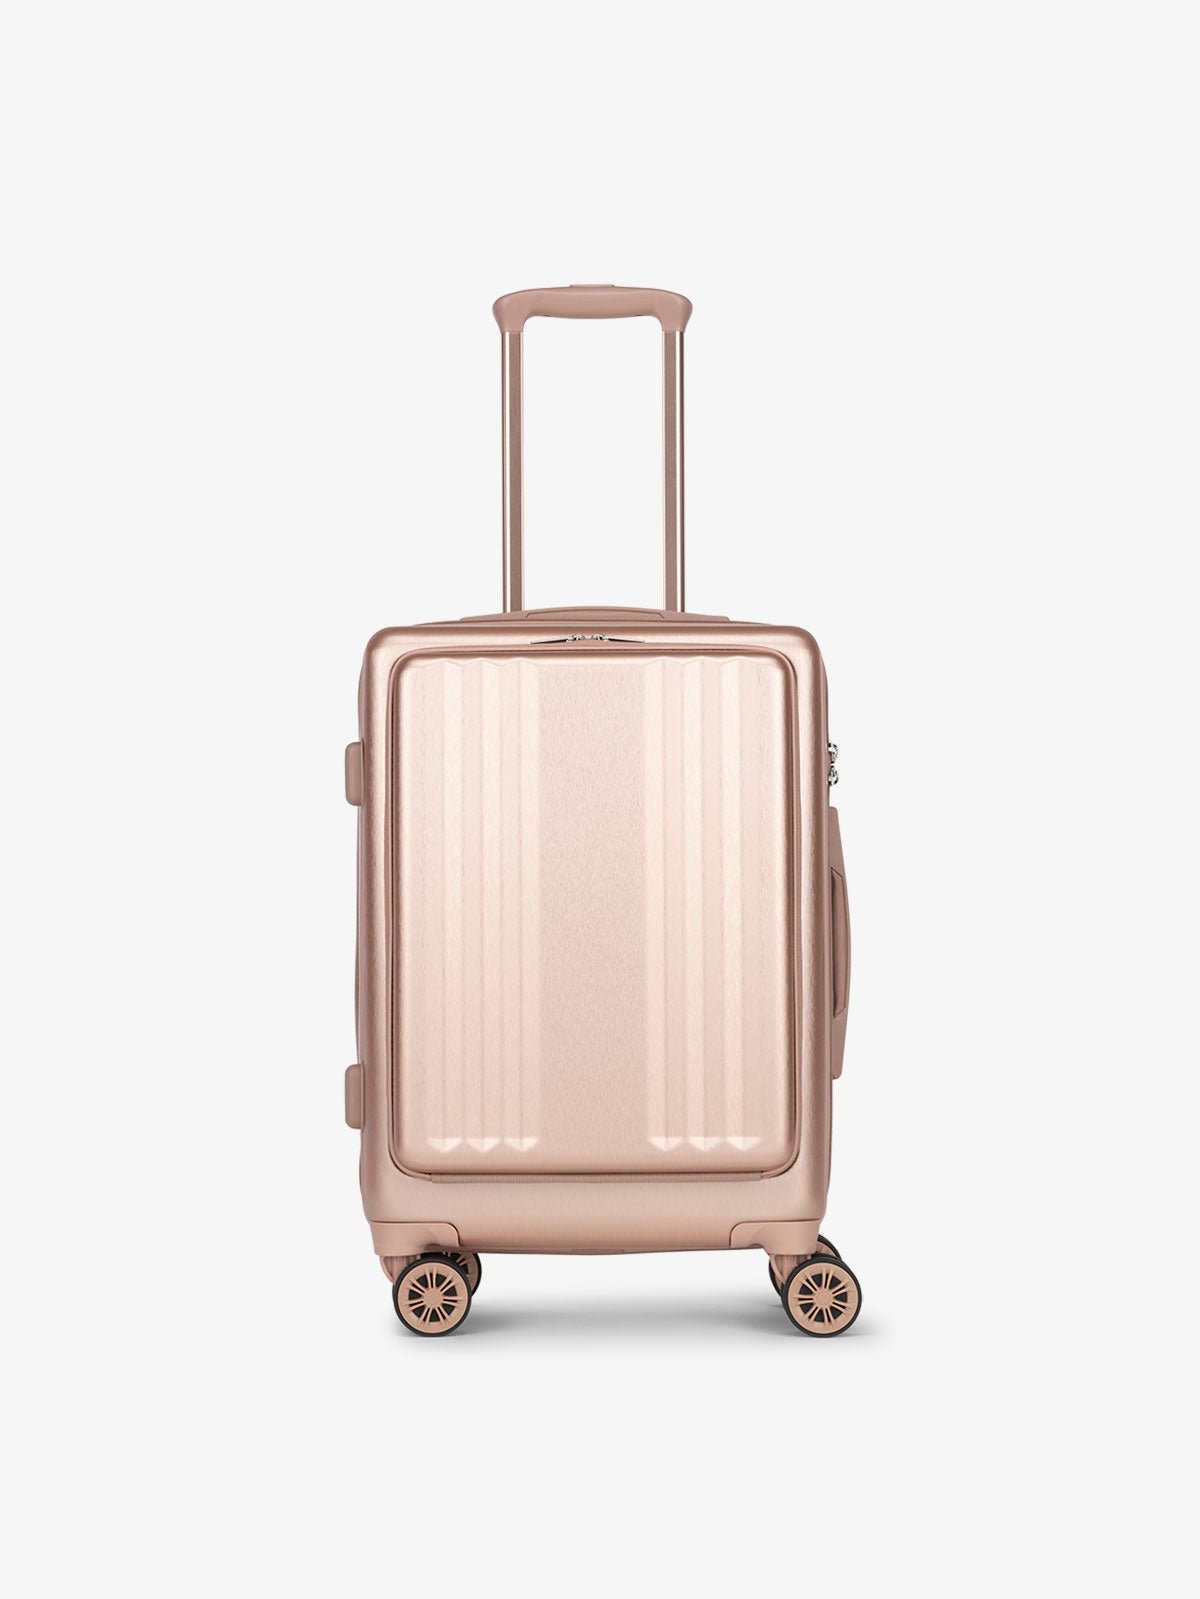 CALPAK Ambeur carry-on suitcase with pocket, TSA lock and 360 spinner wheels in rose gold